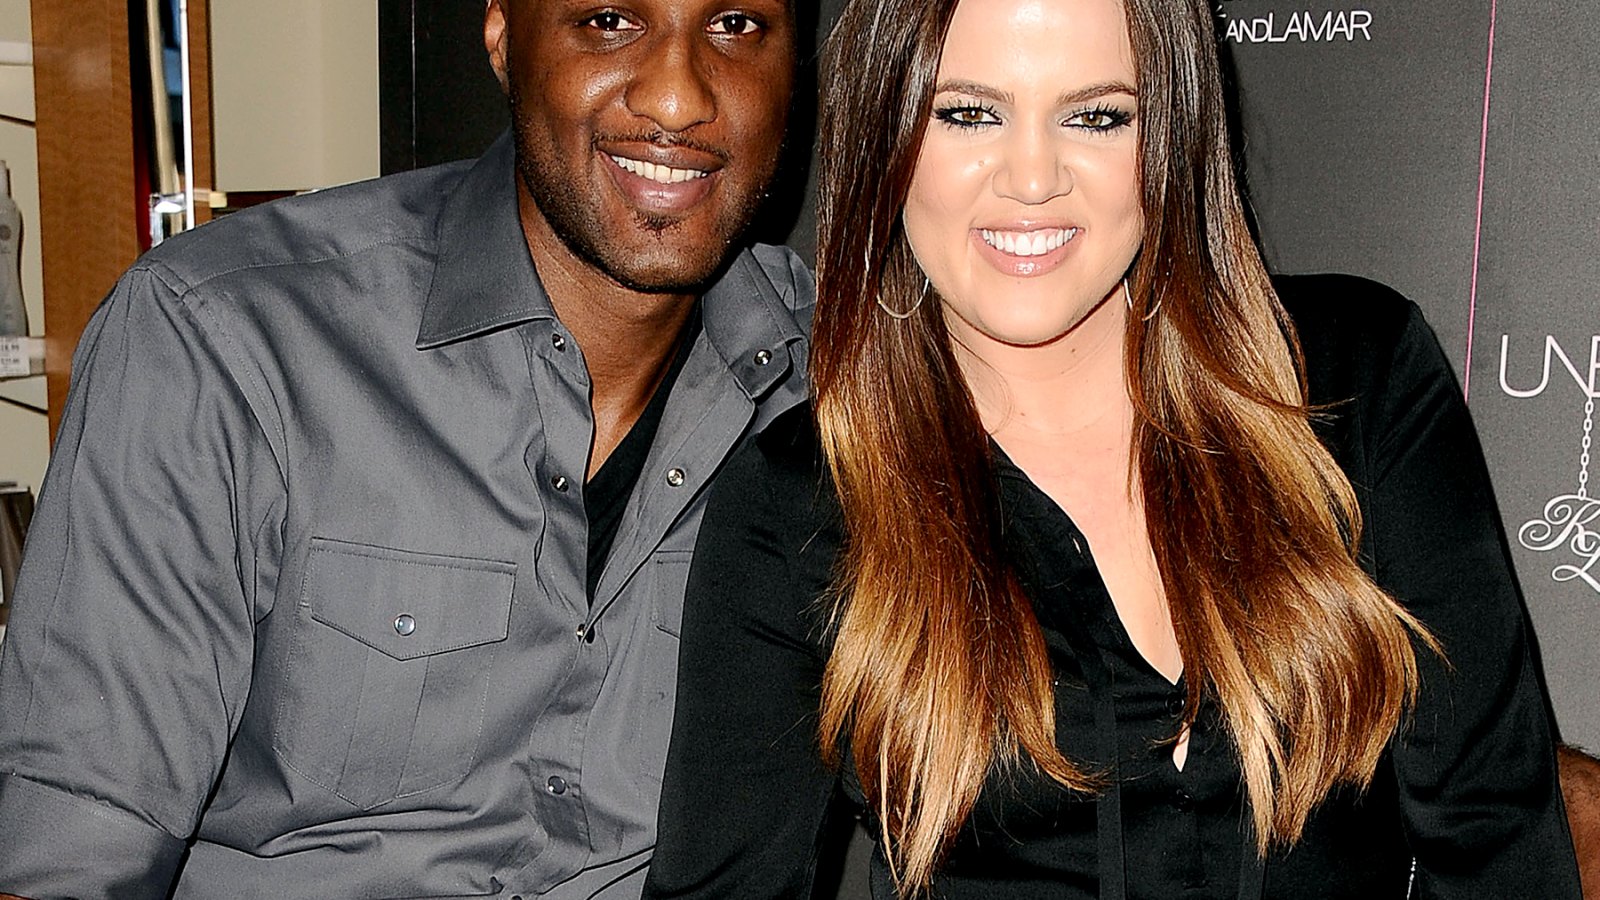 Khloe Kardashian Opens Up About Lamar Odom: "I Miss Him Every Day"